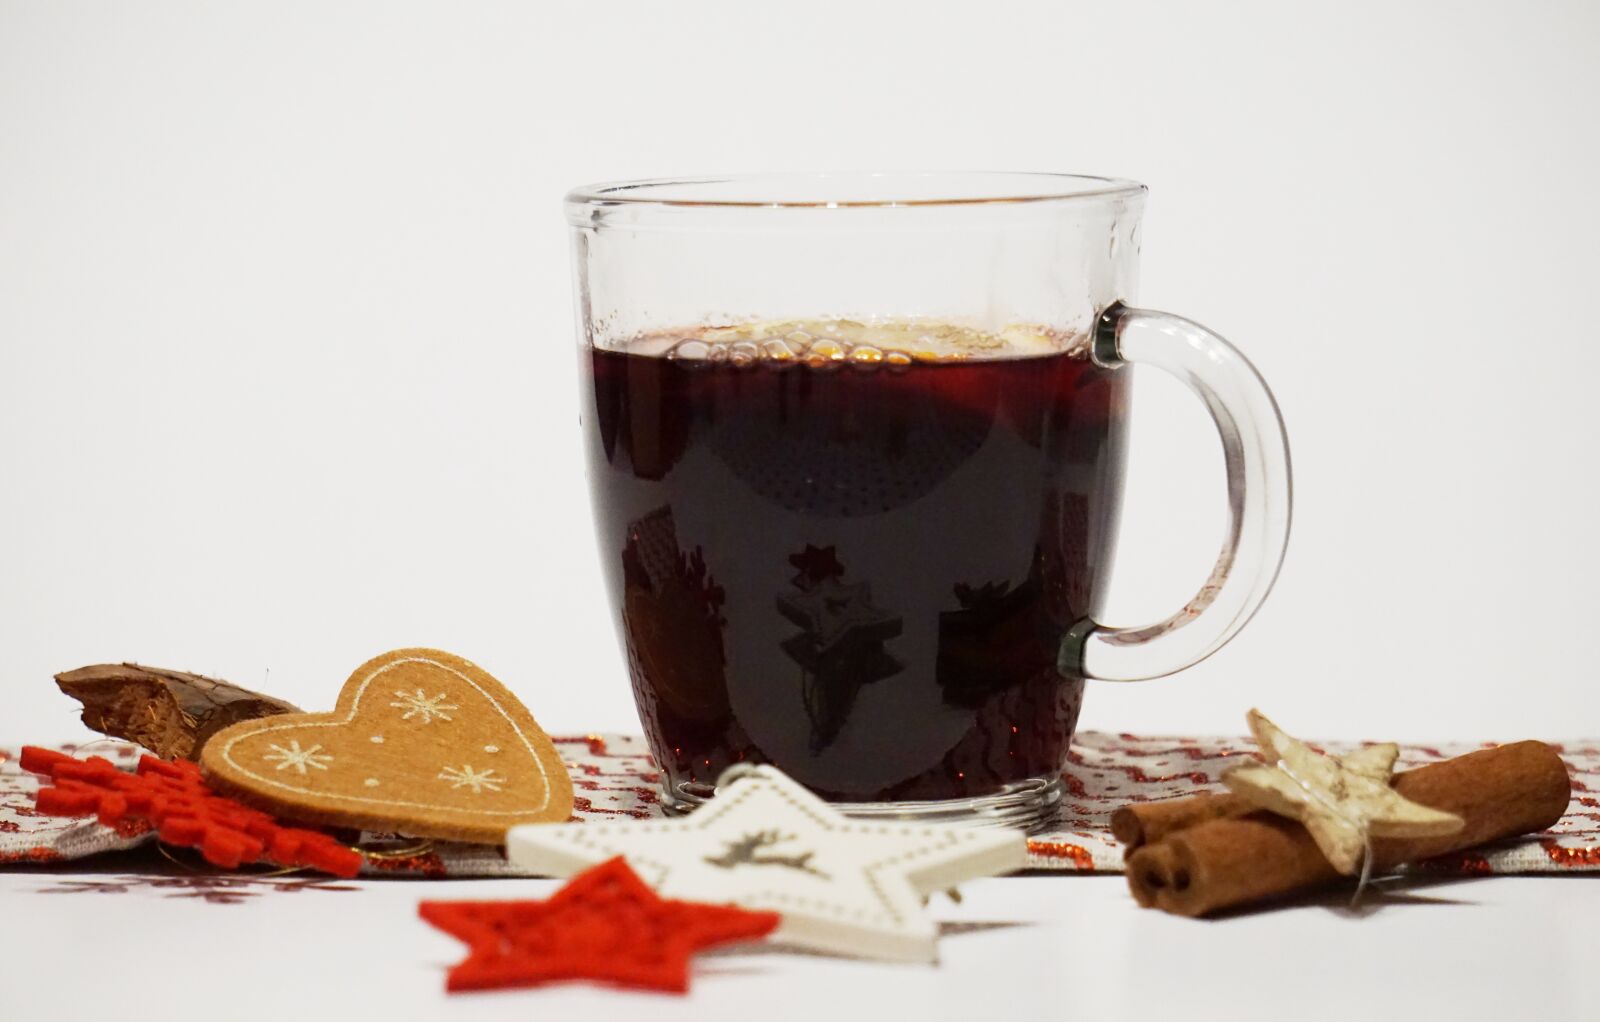 Sony a6000 sample photo. Mulled claret, christmas, winter photography